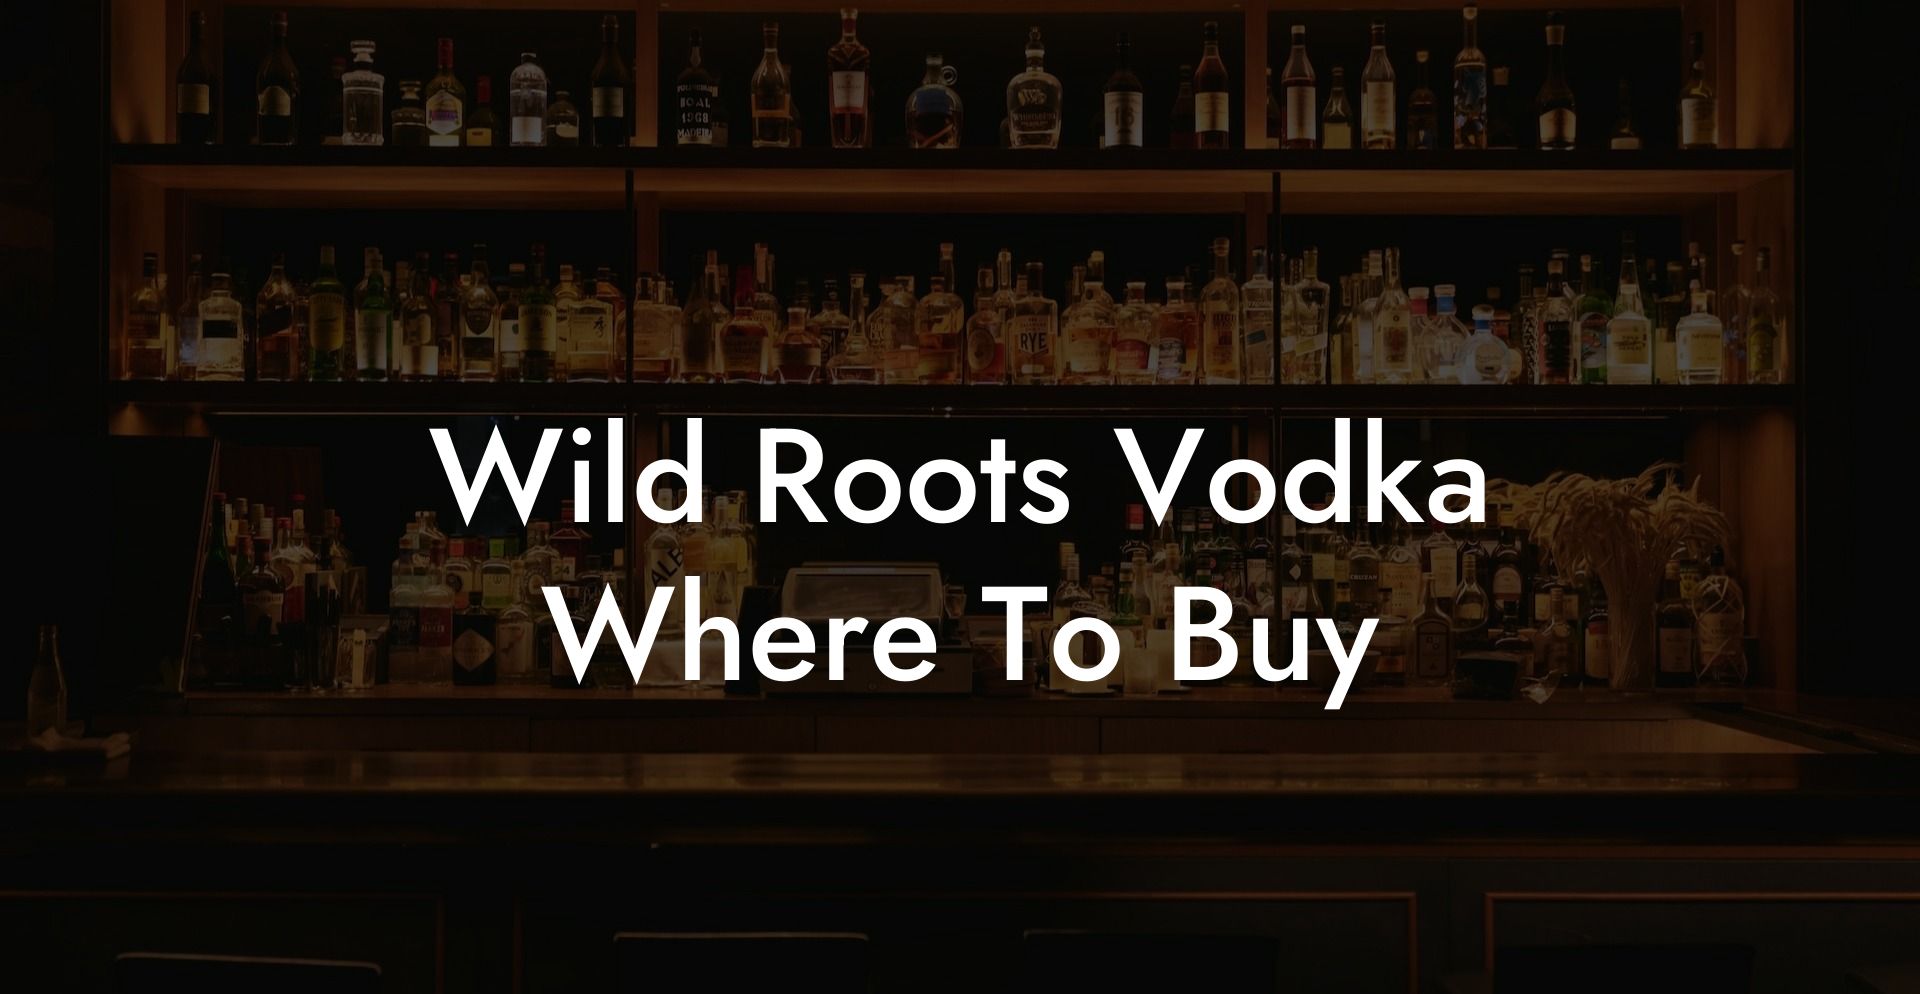 Wild Roots Vodka Where To Buy